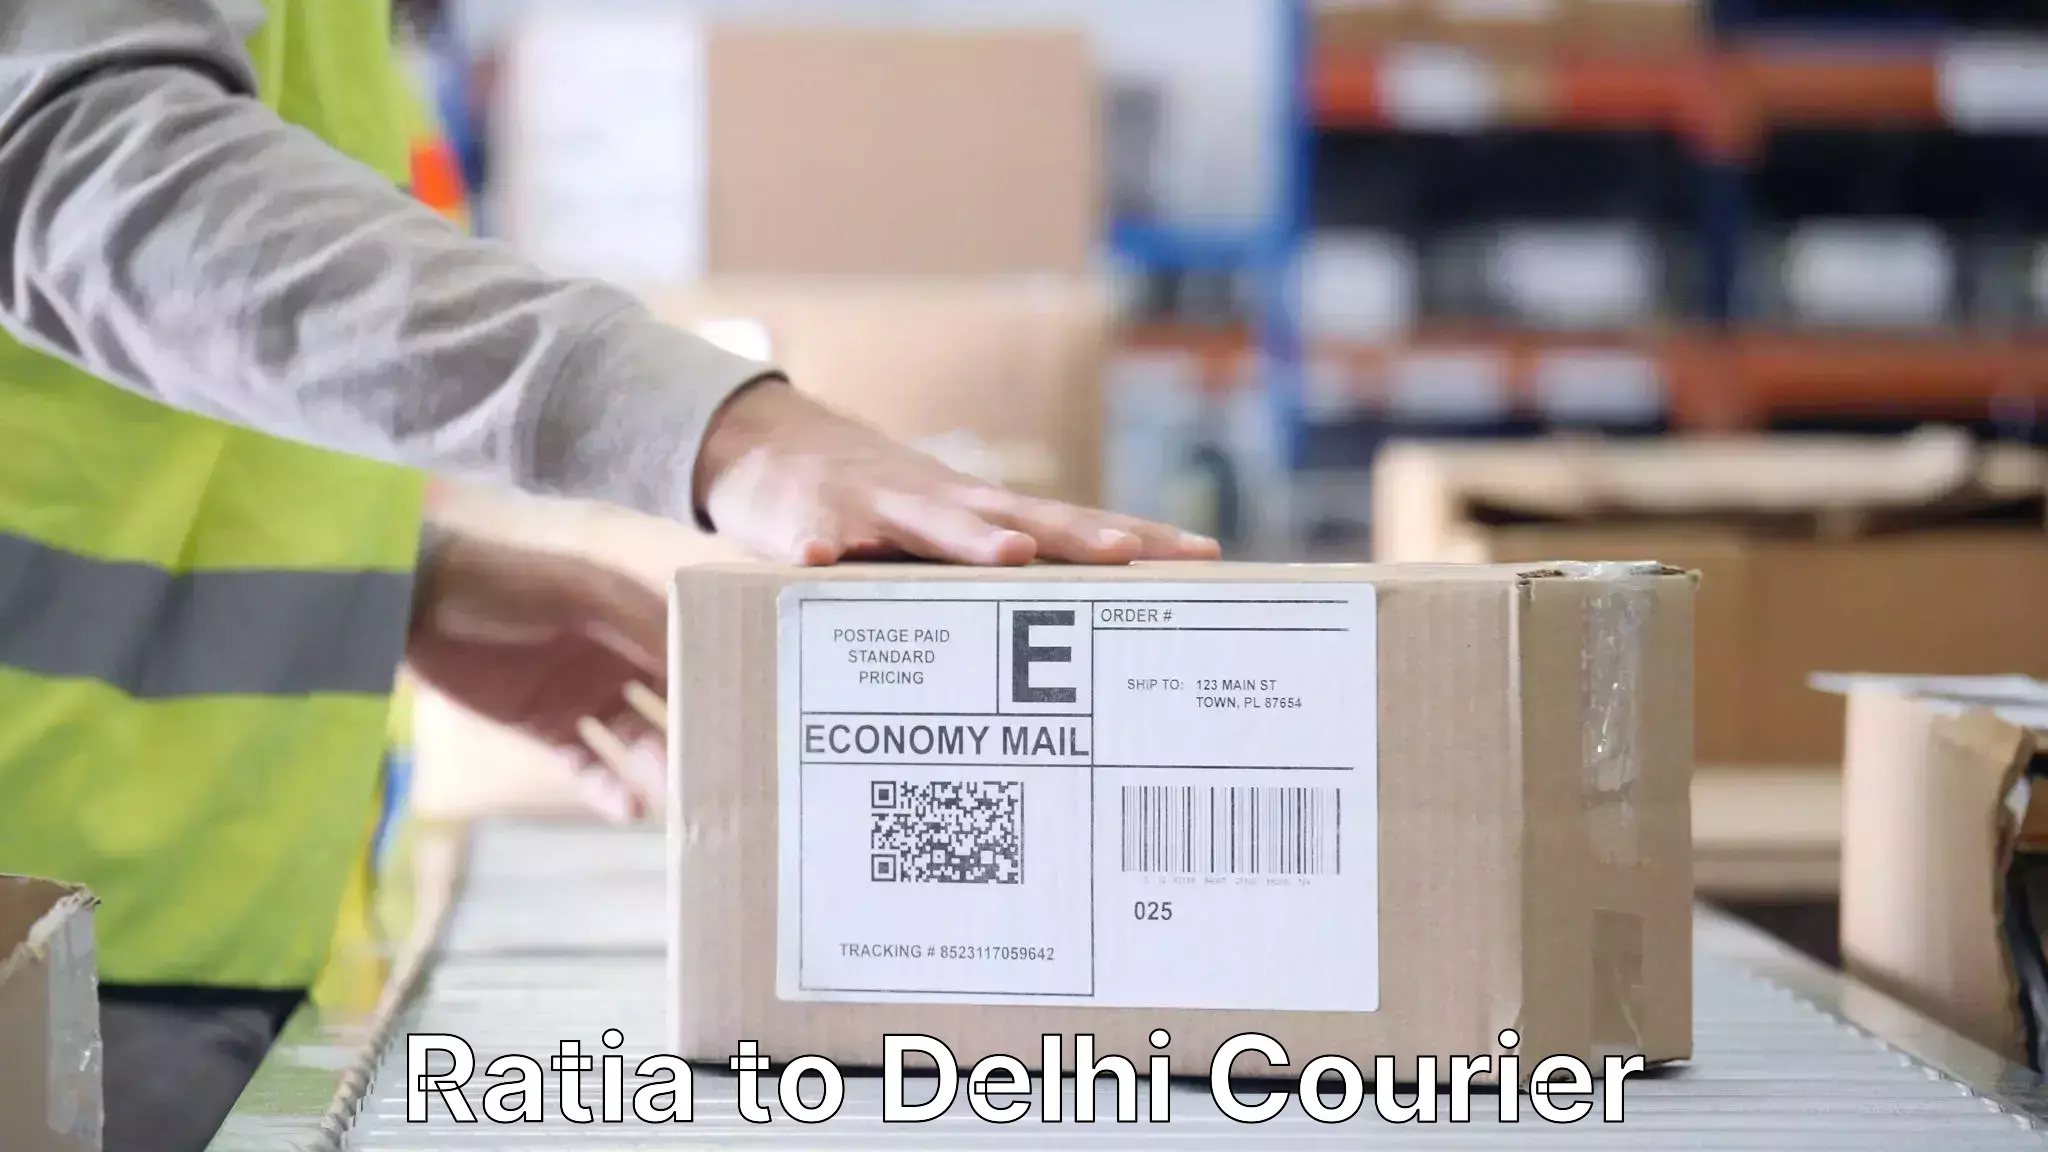 Professional moving company Ratia to NCR